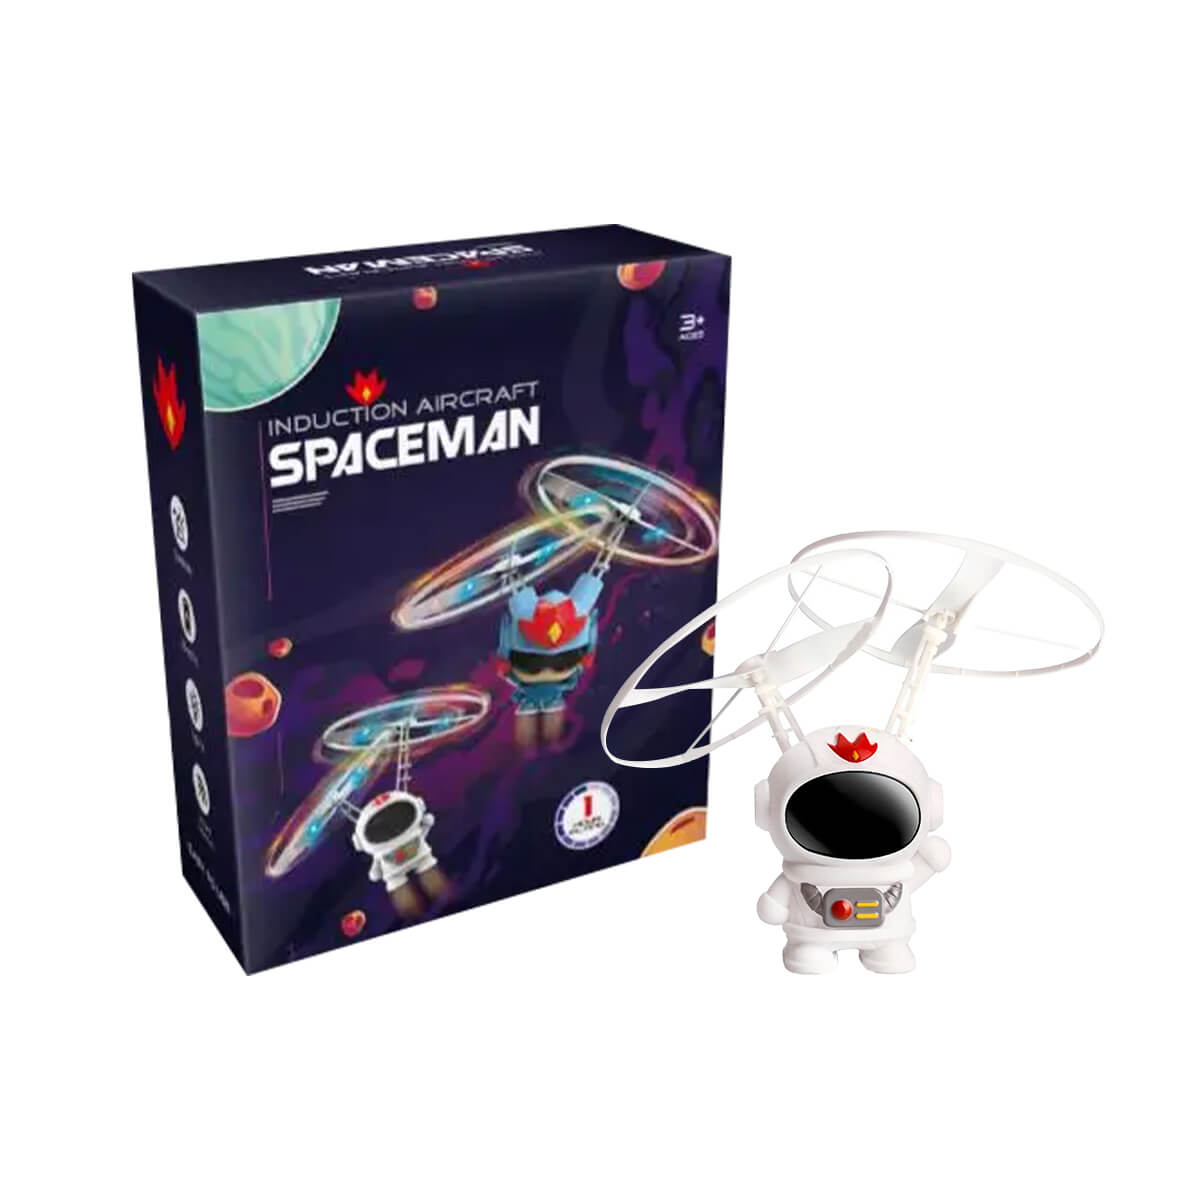 Spaceman Induction Aircraft Toy